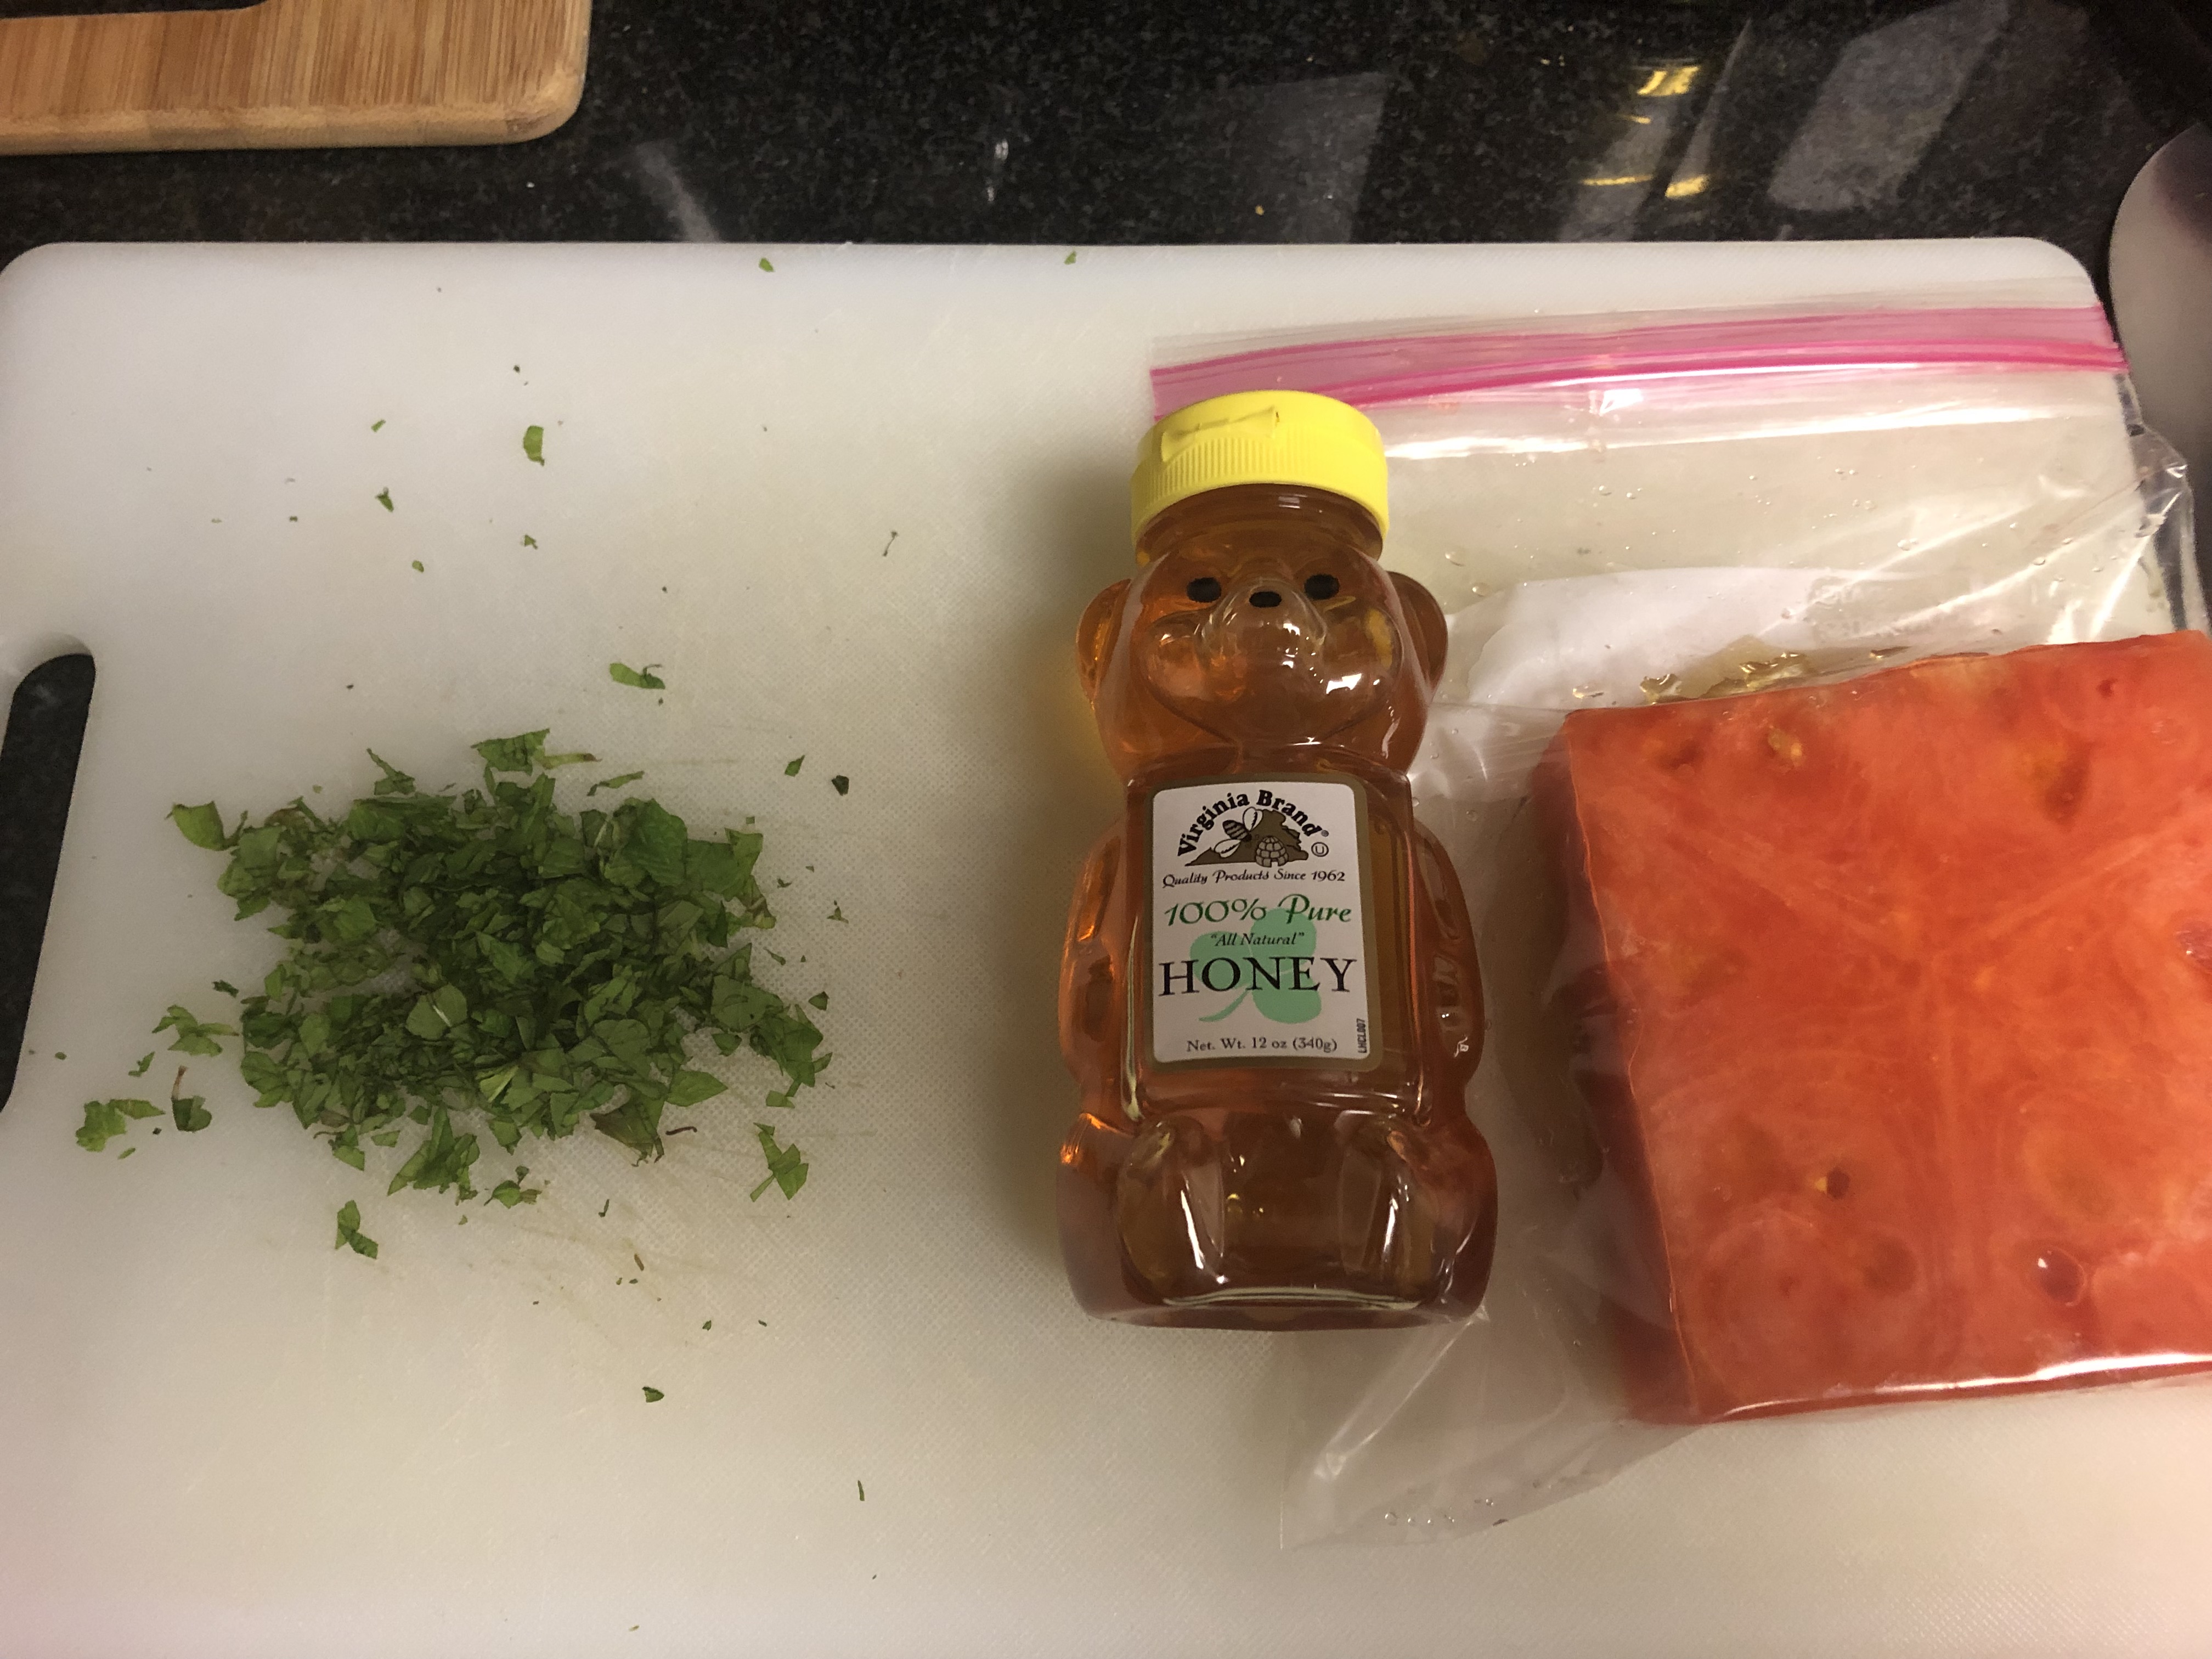 Watermelon in sandwich bag with honey next to chopped mint